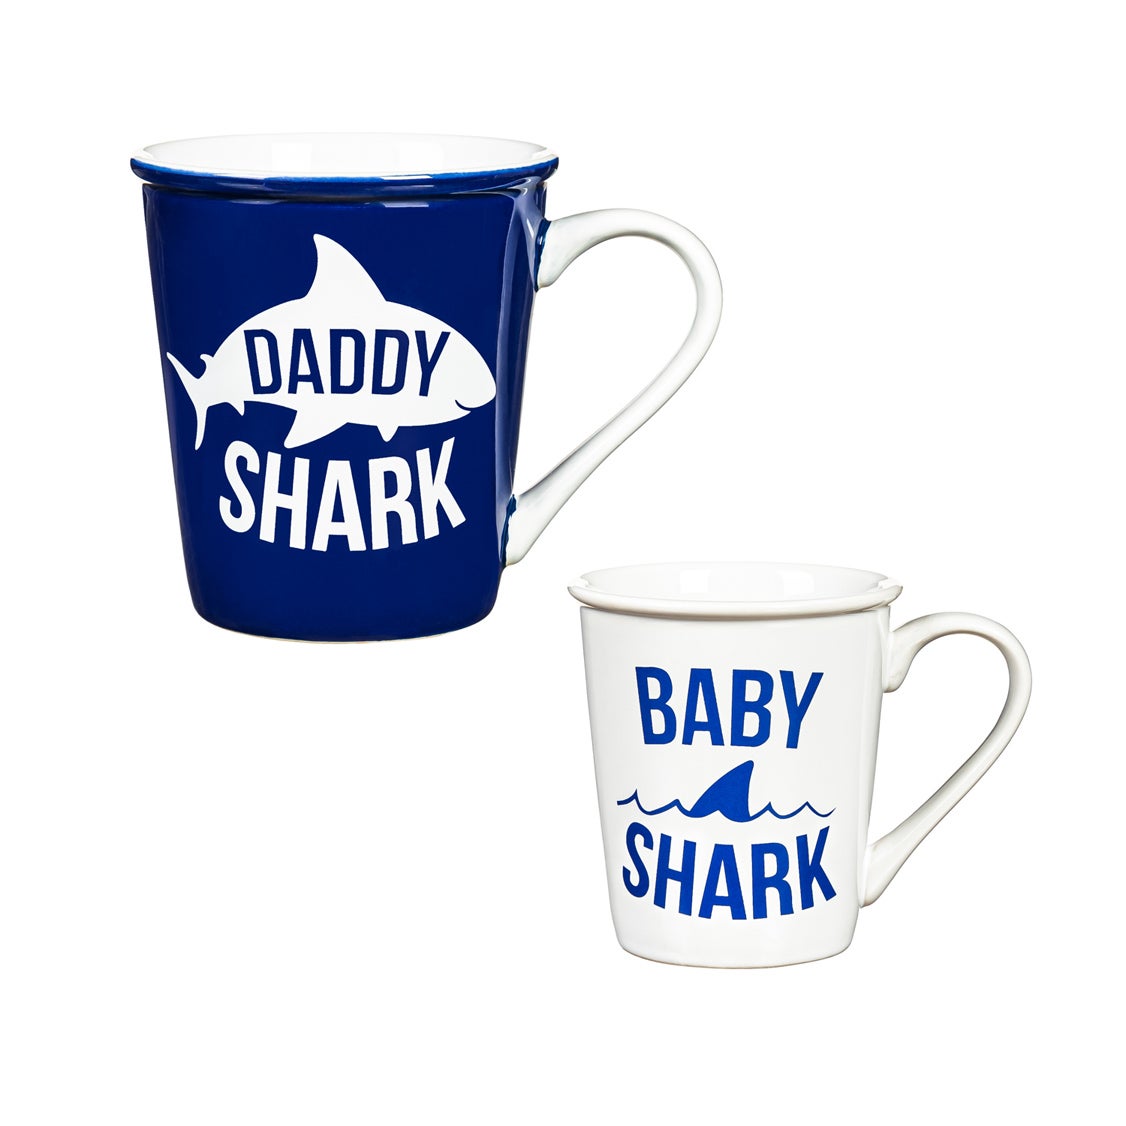 Daddy and Me Ceramic Cup Gift Set, 16 OZ and 8 OZ, Daddy Shark/Baby Shark